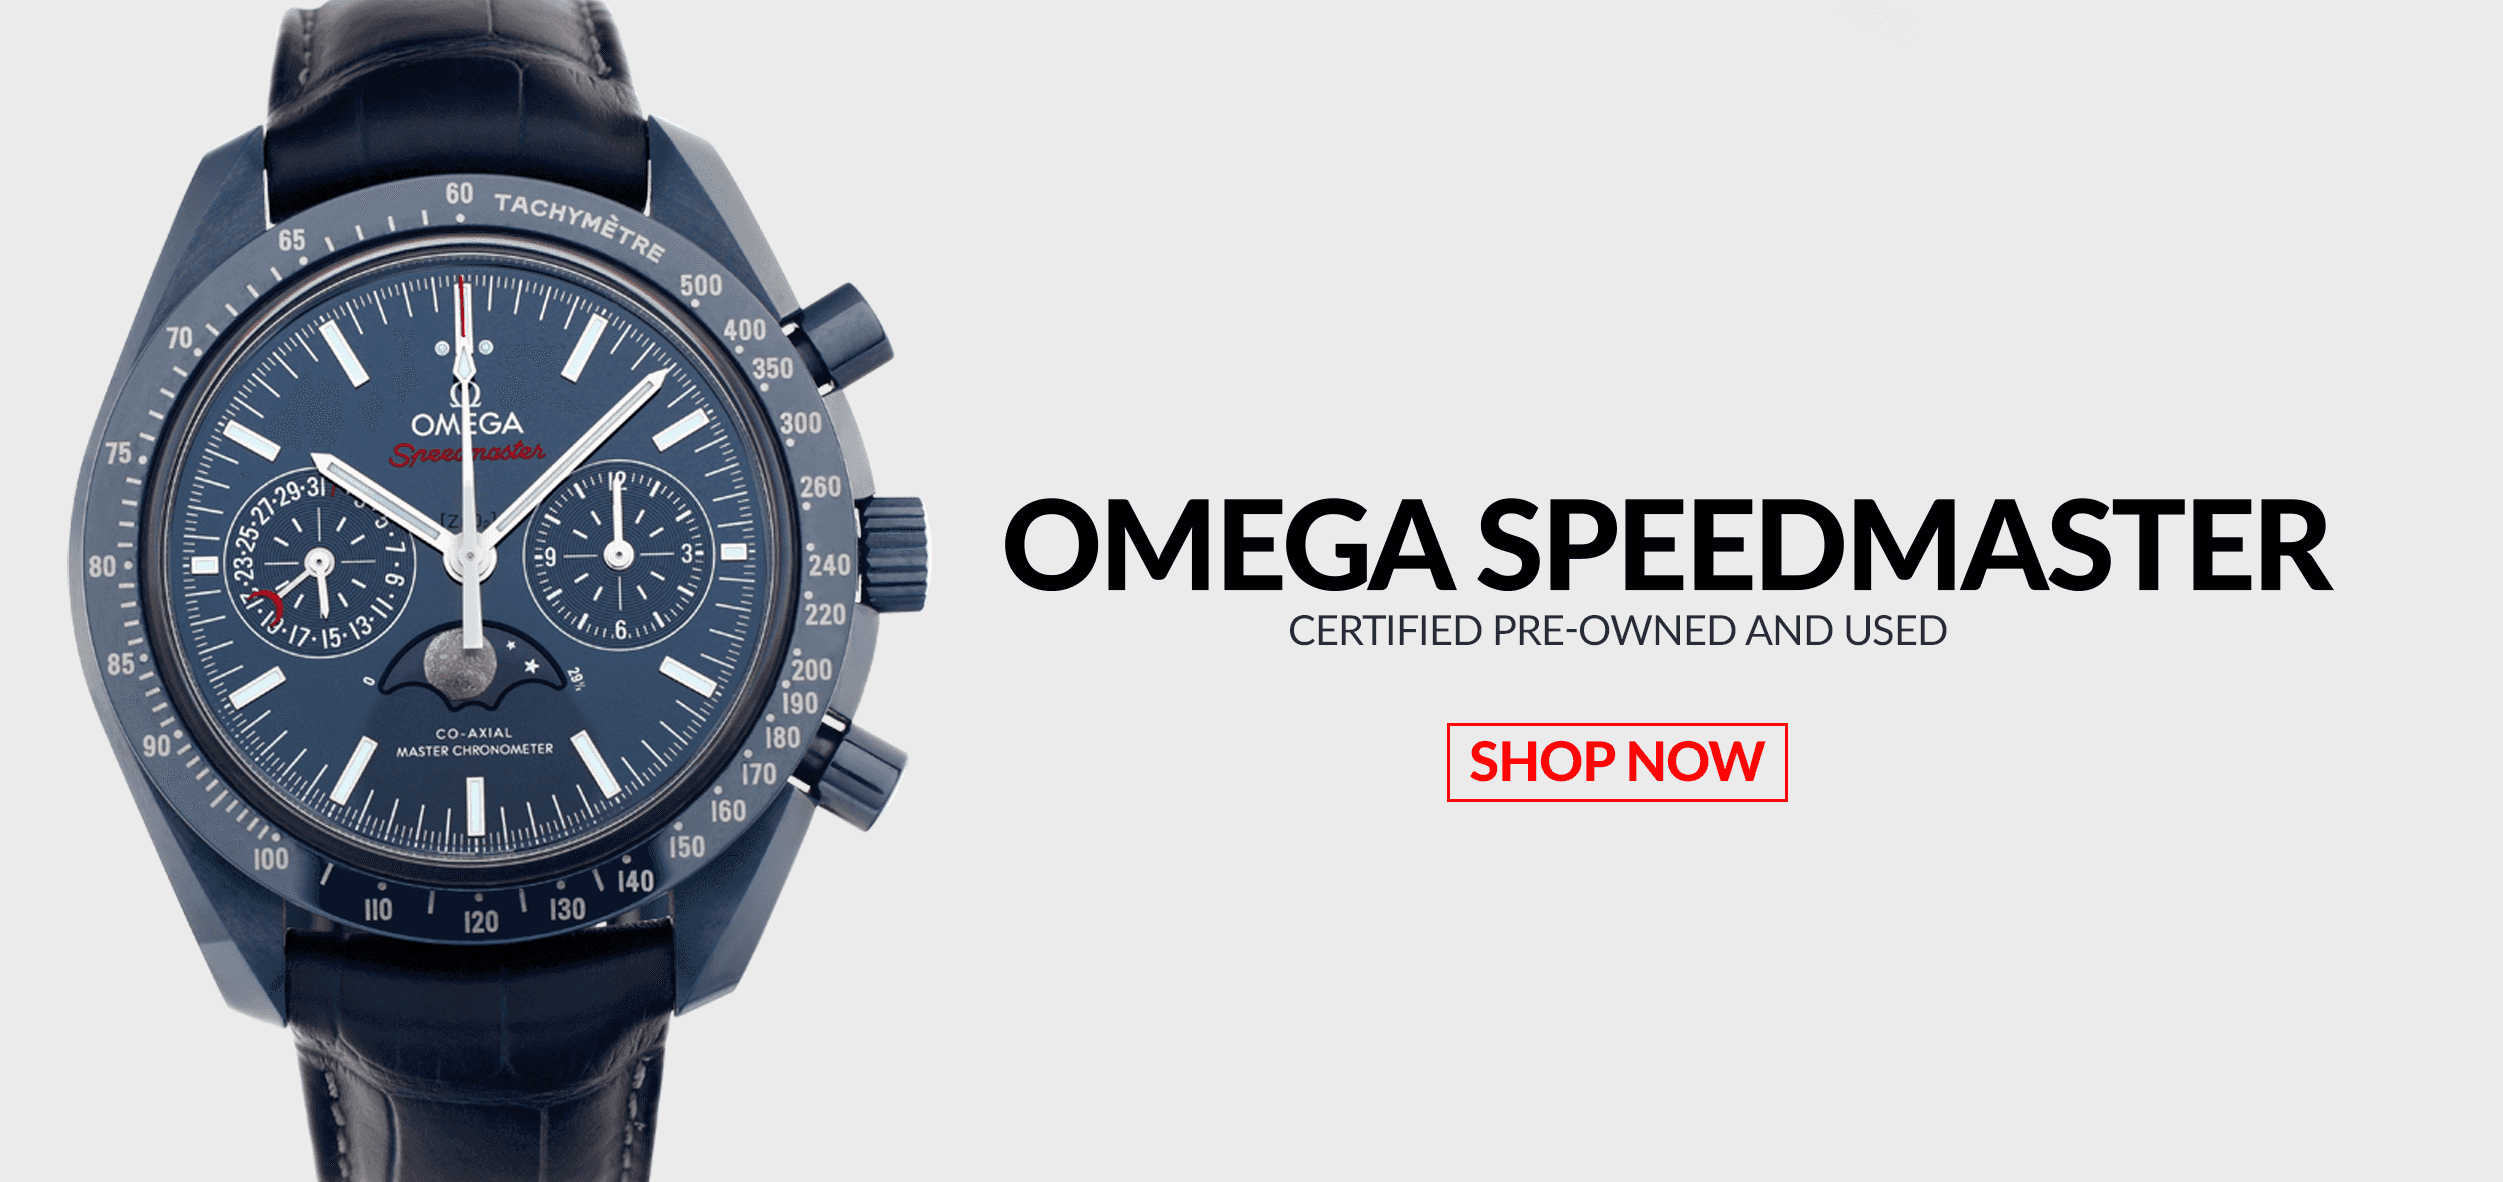 Pre-Owned Certified Used Omega Speedmaster Watches Header